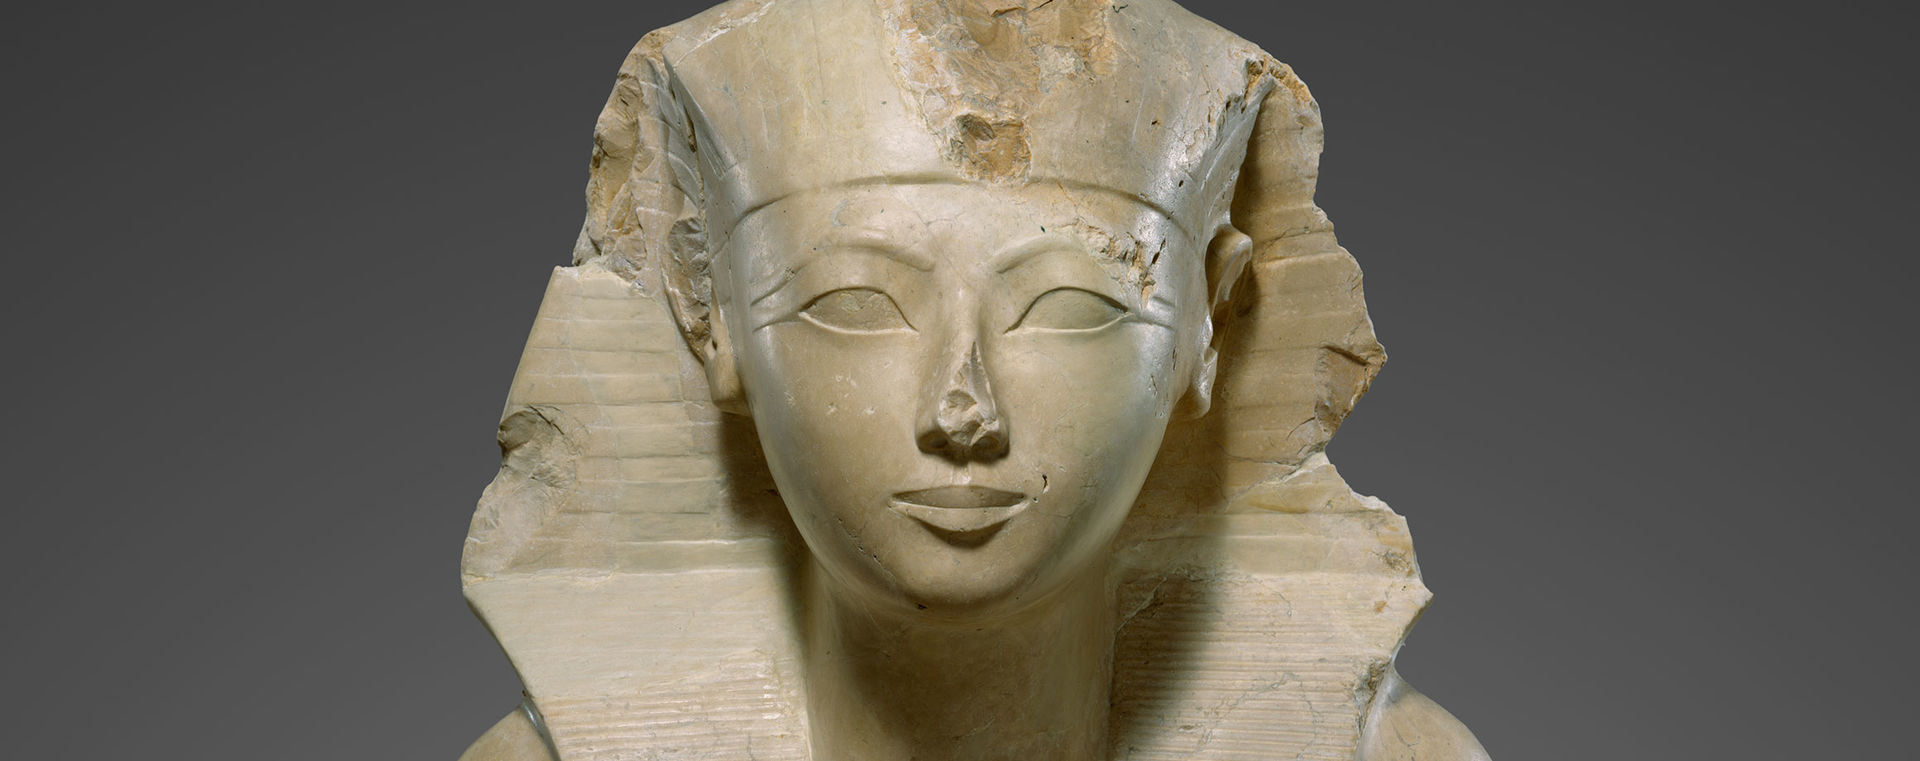 Frontal view of the head of Hatshepsut